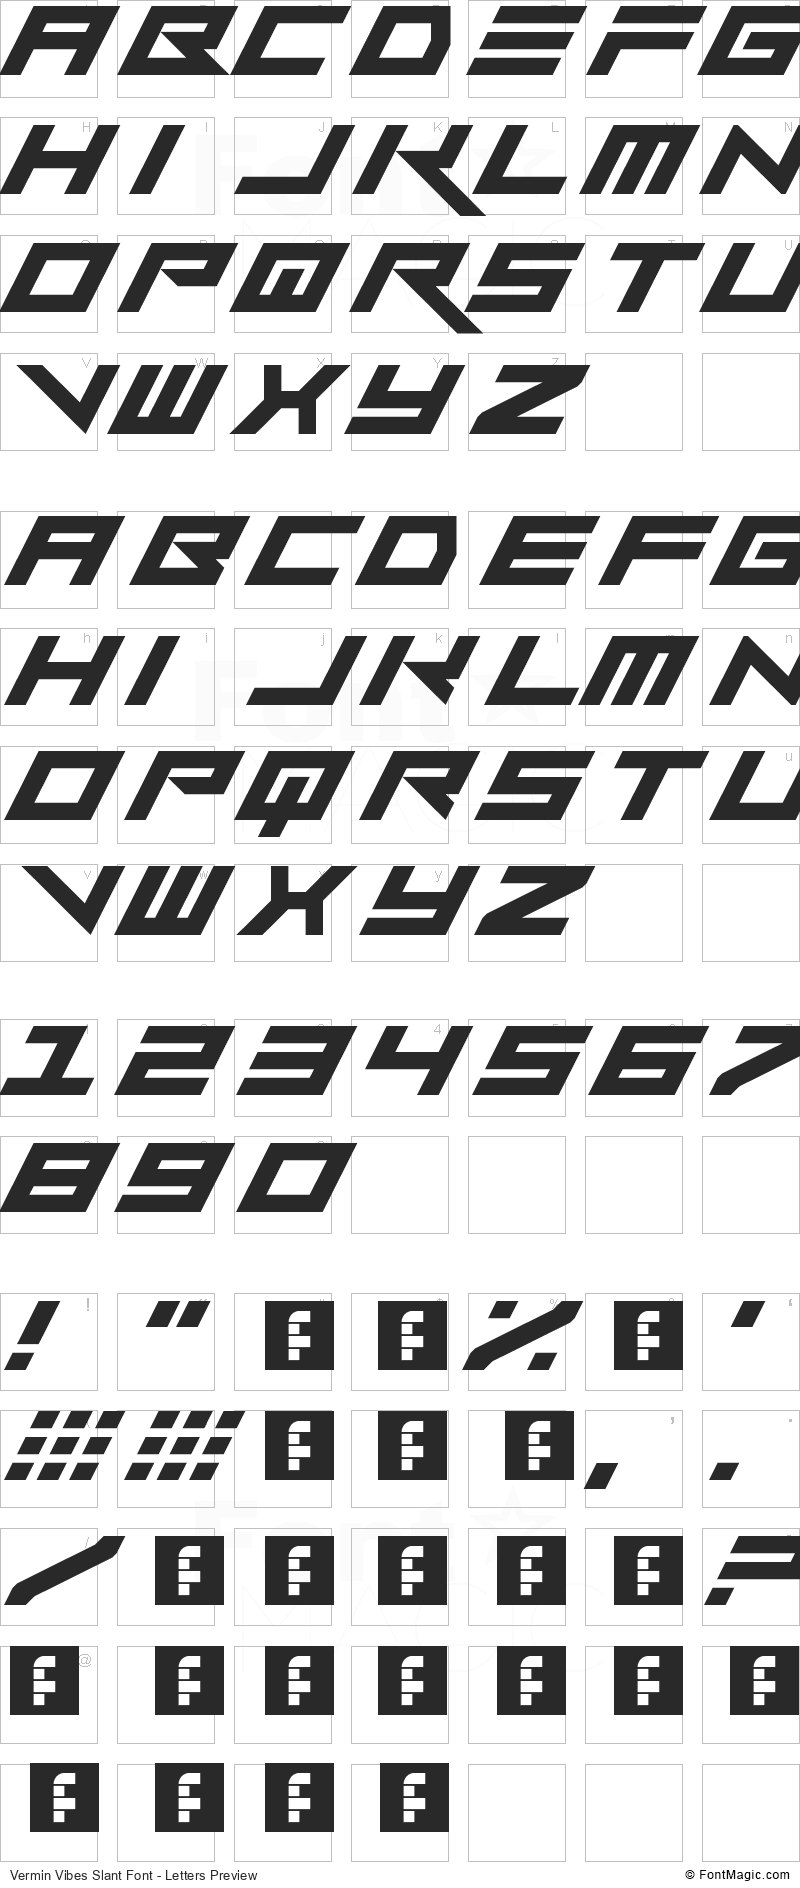 Vermin Vibes Slant Font - All Latters Preview Chart